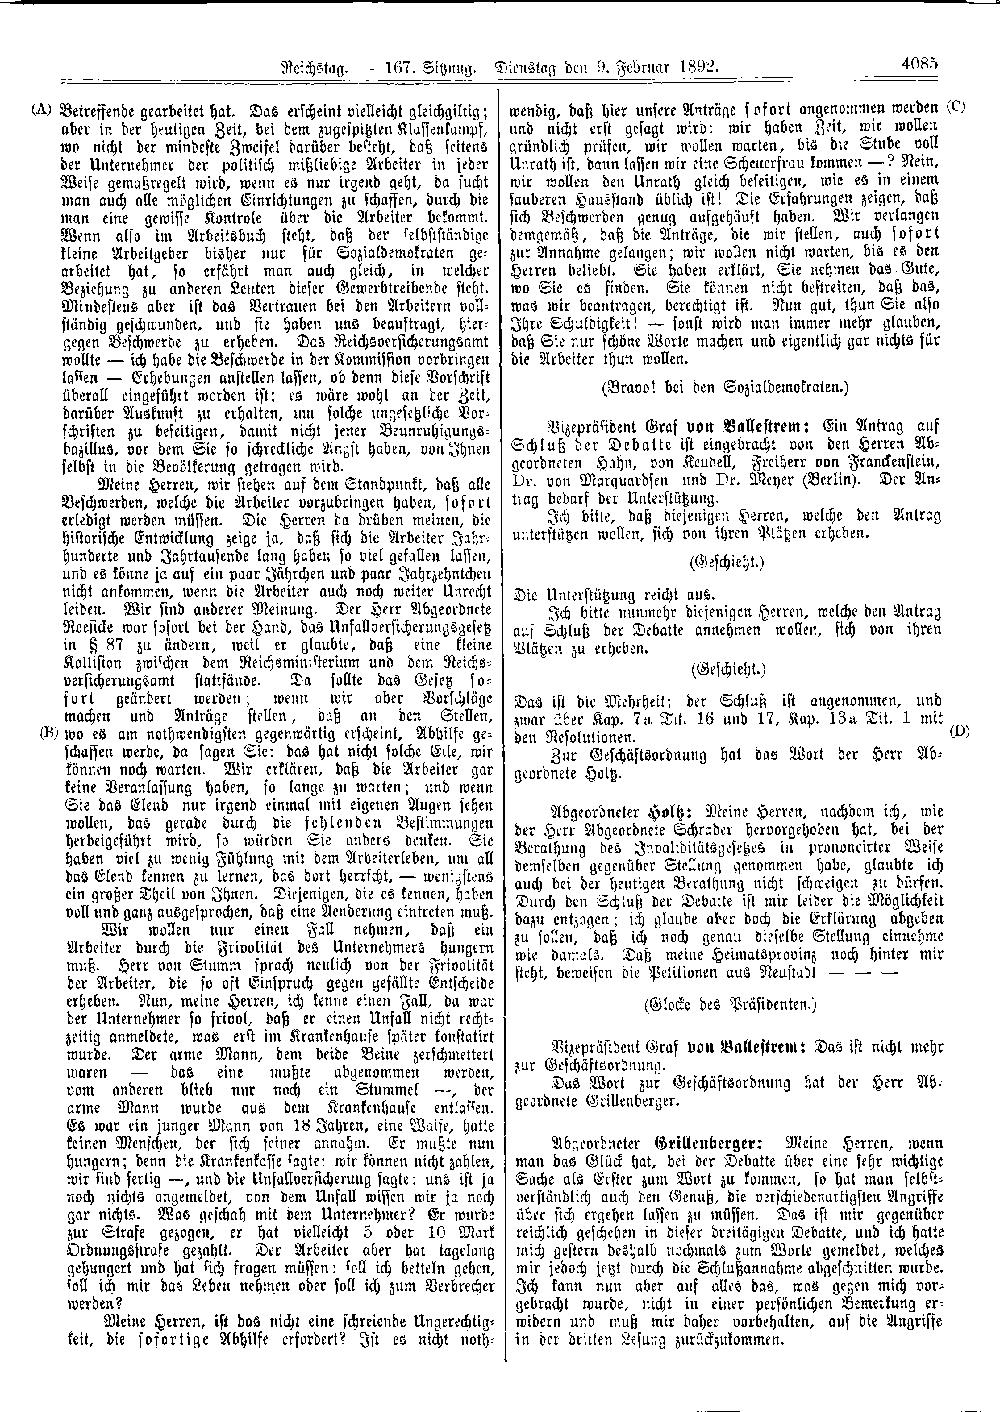 Scan of page 4085